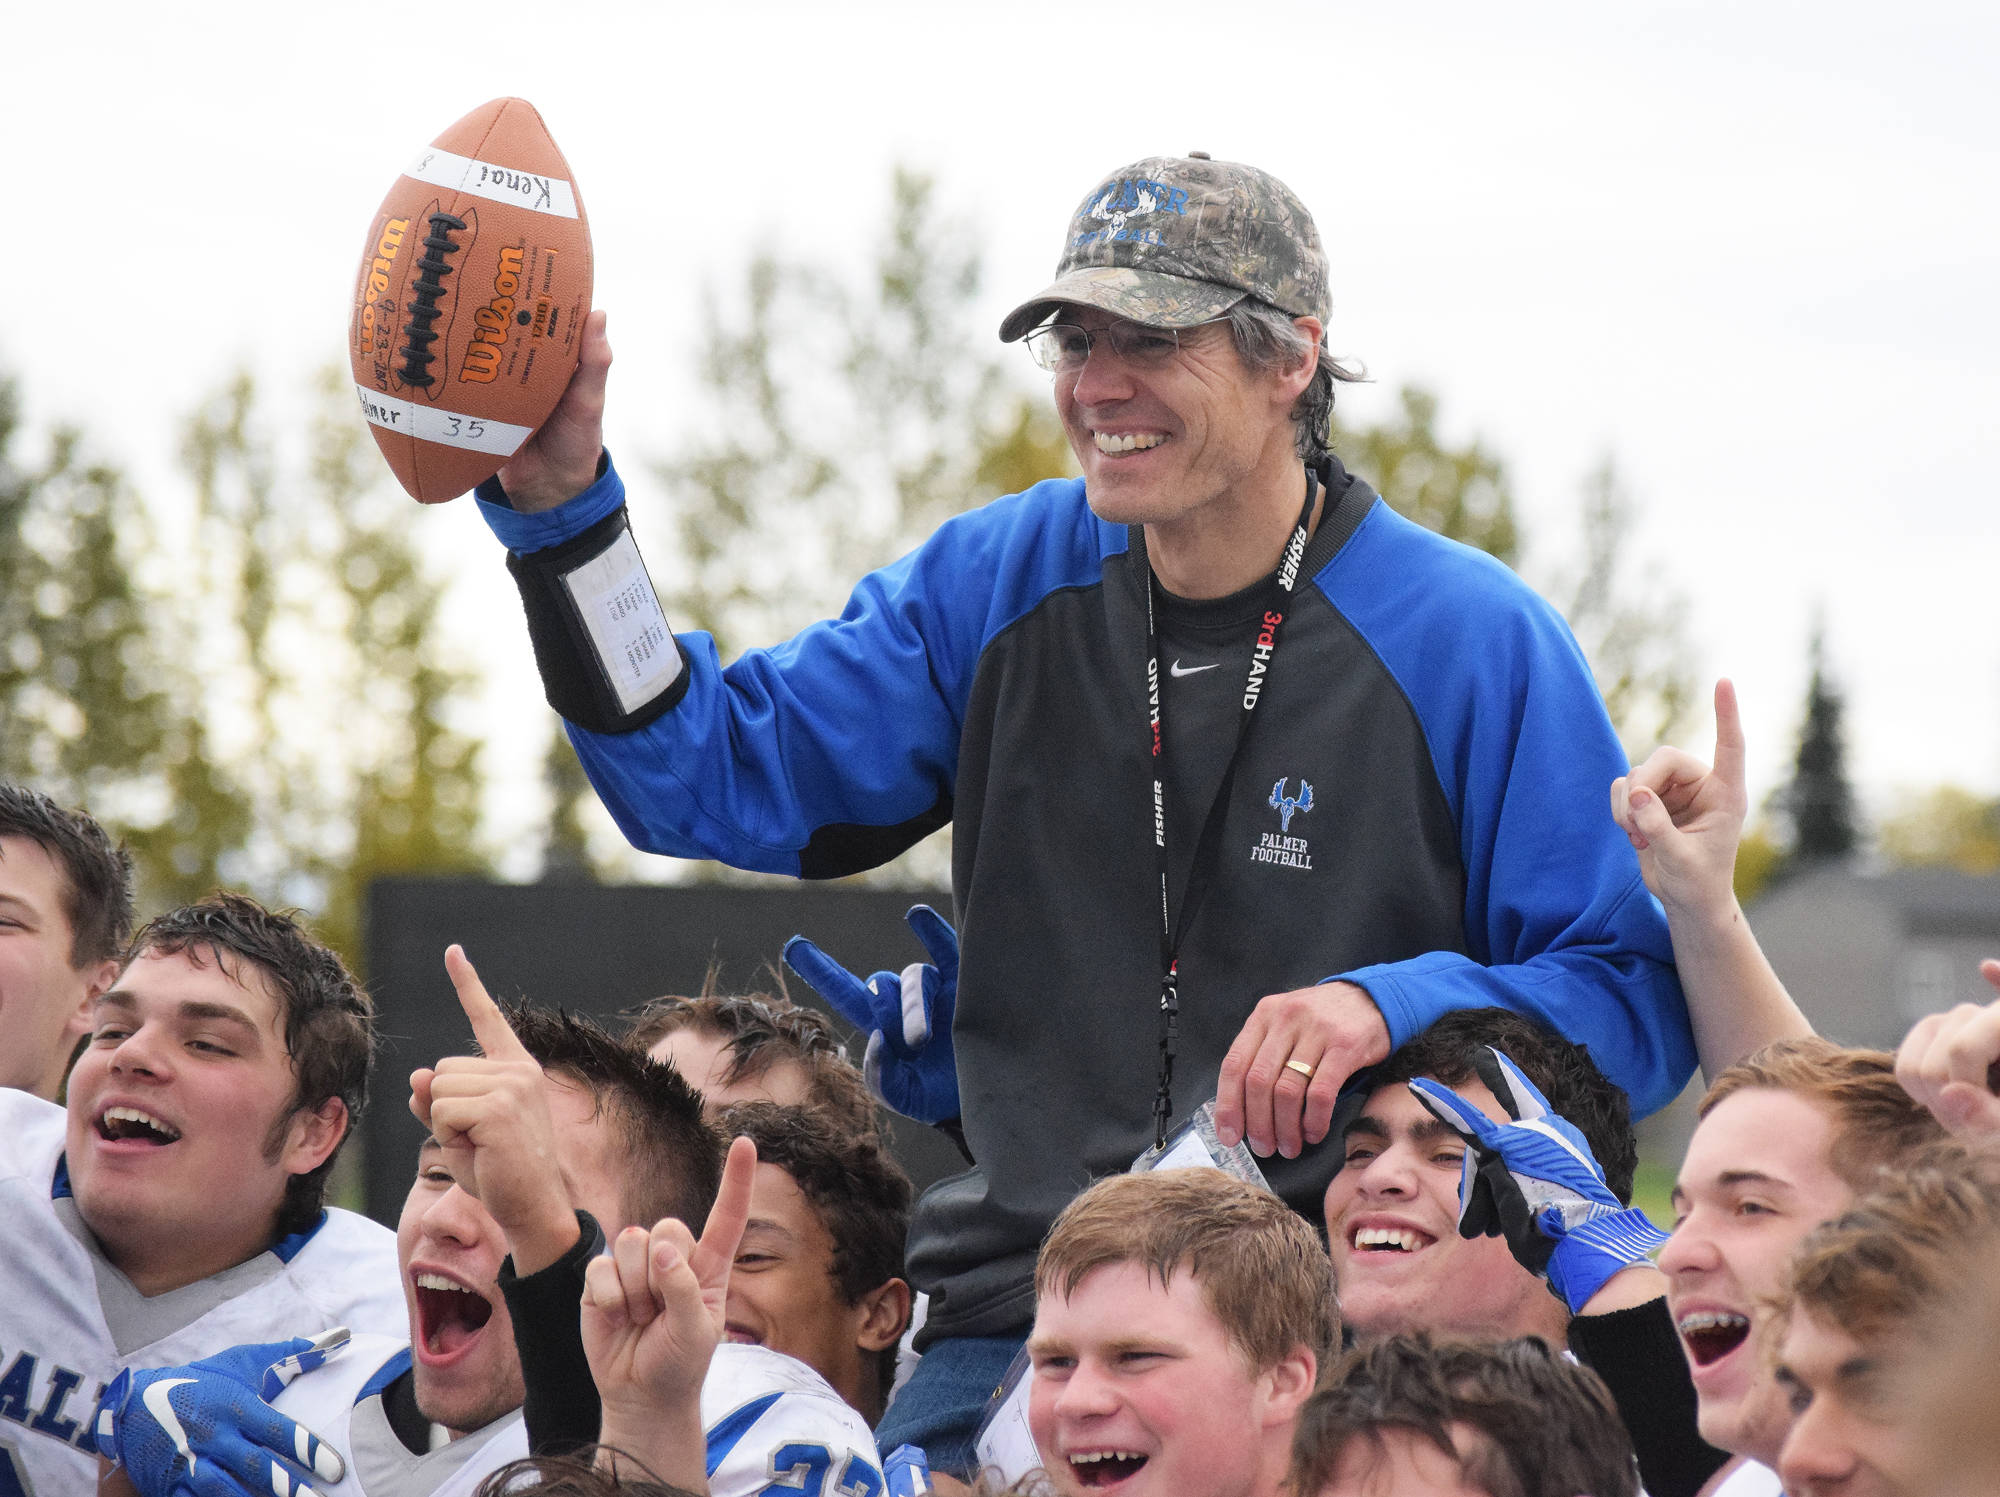 Palmer football coach Rod Christianson celebrates his 151st career coaching win with the Moose, Saturday at Ed Hollier field in Kenai. The milestone victory placed Christianson atop the all-time Alaska football coaching win list. (Photo by Joey Klecka/Peninsula Clarion)